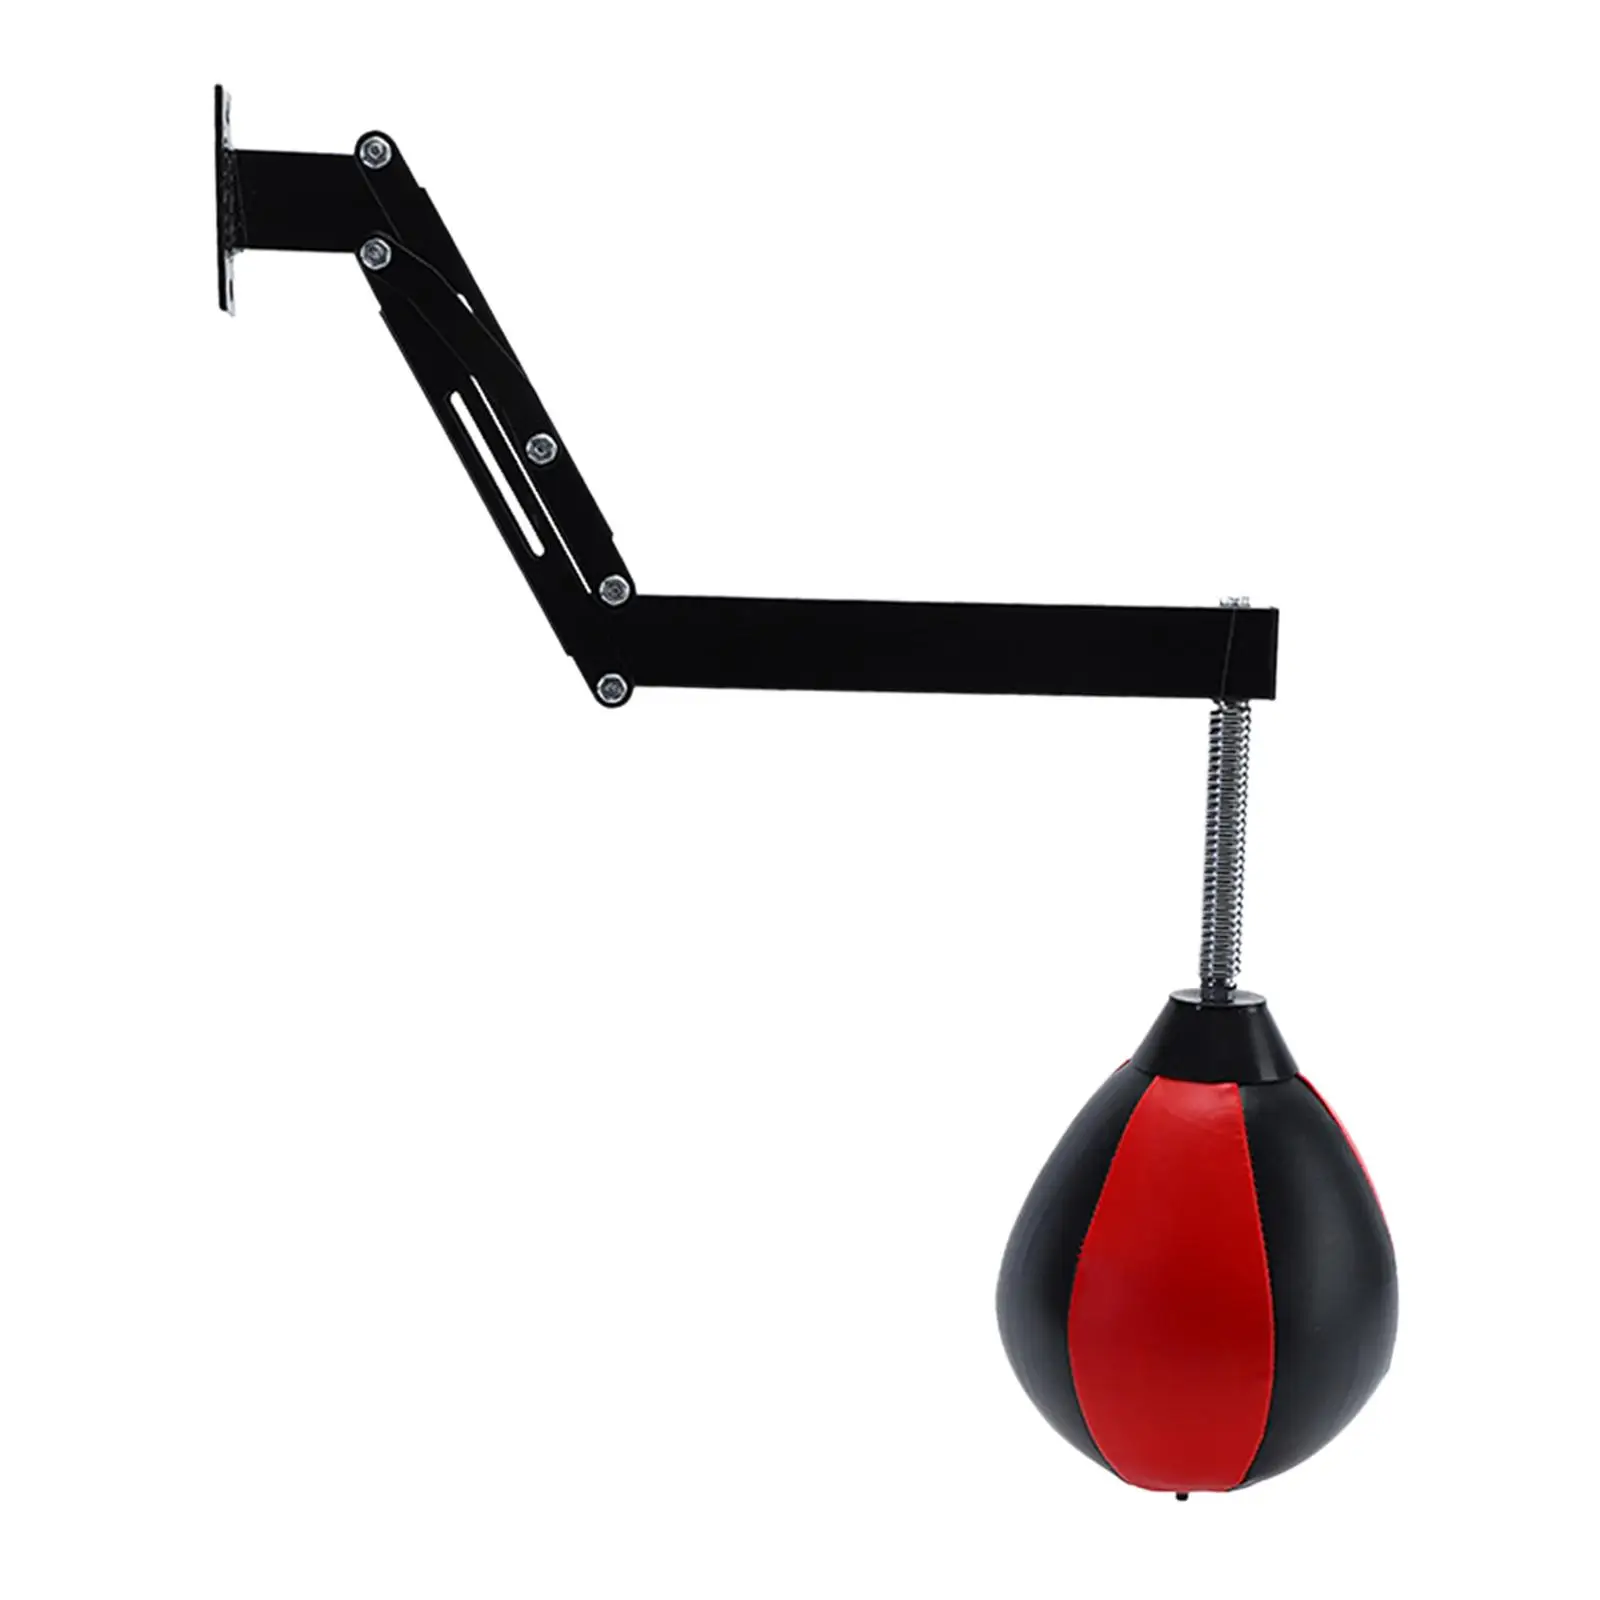 Speed Bag Inflatable Adjustable PU Leather Heavy Duty Wall Mount Boxing Punching Bag for Training Sanda Sports Workout